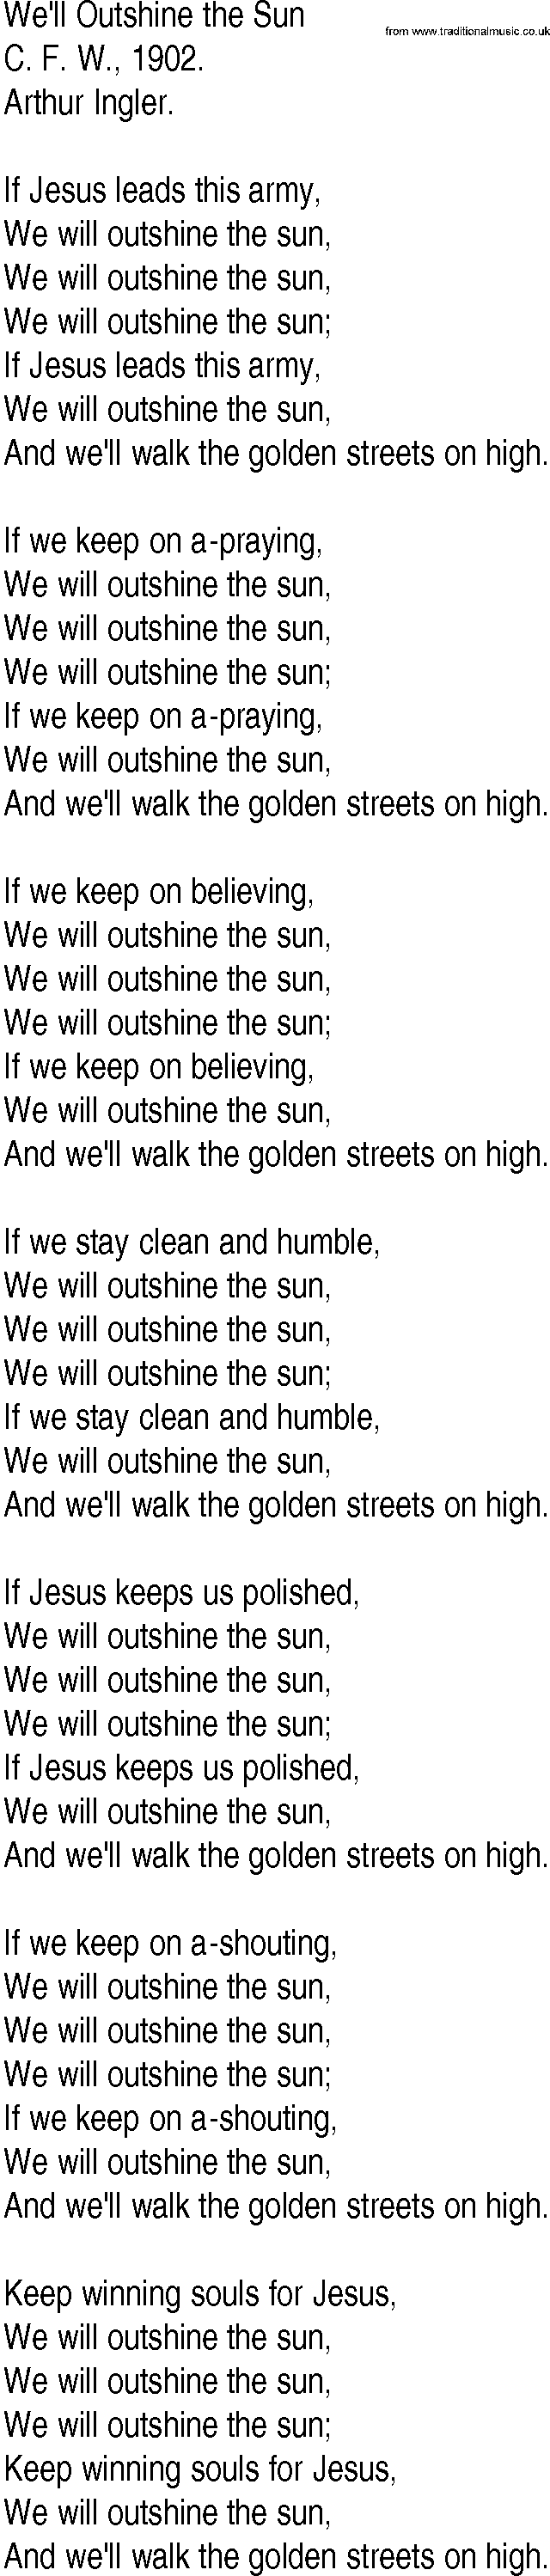 Hymn and Gospel Song: We'll Outshine the Sun by C F W lyrics